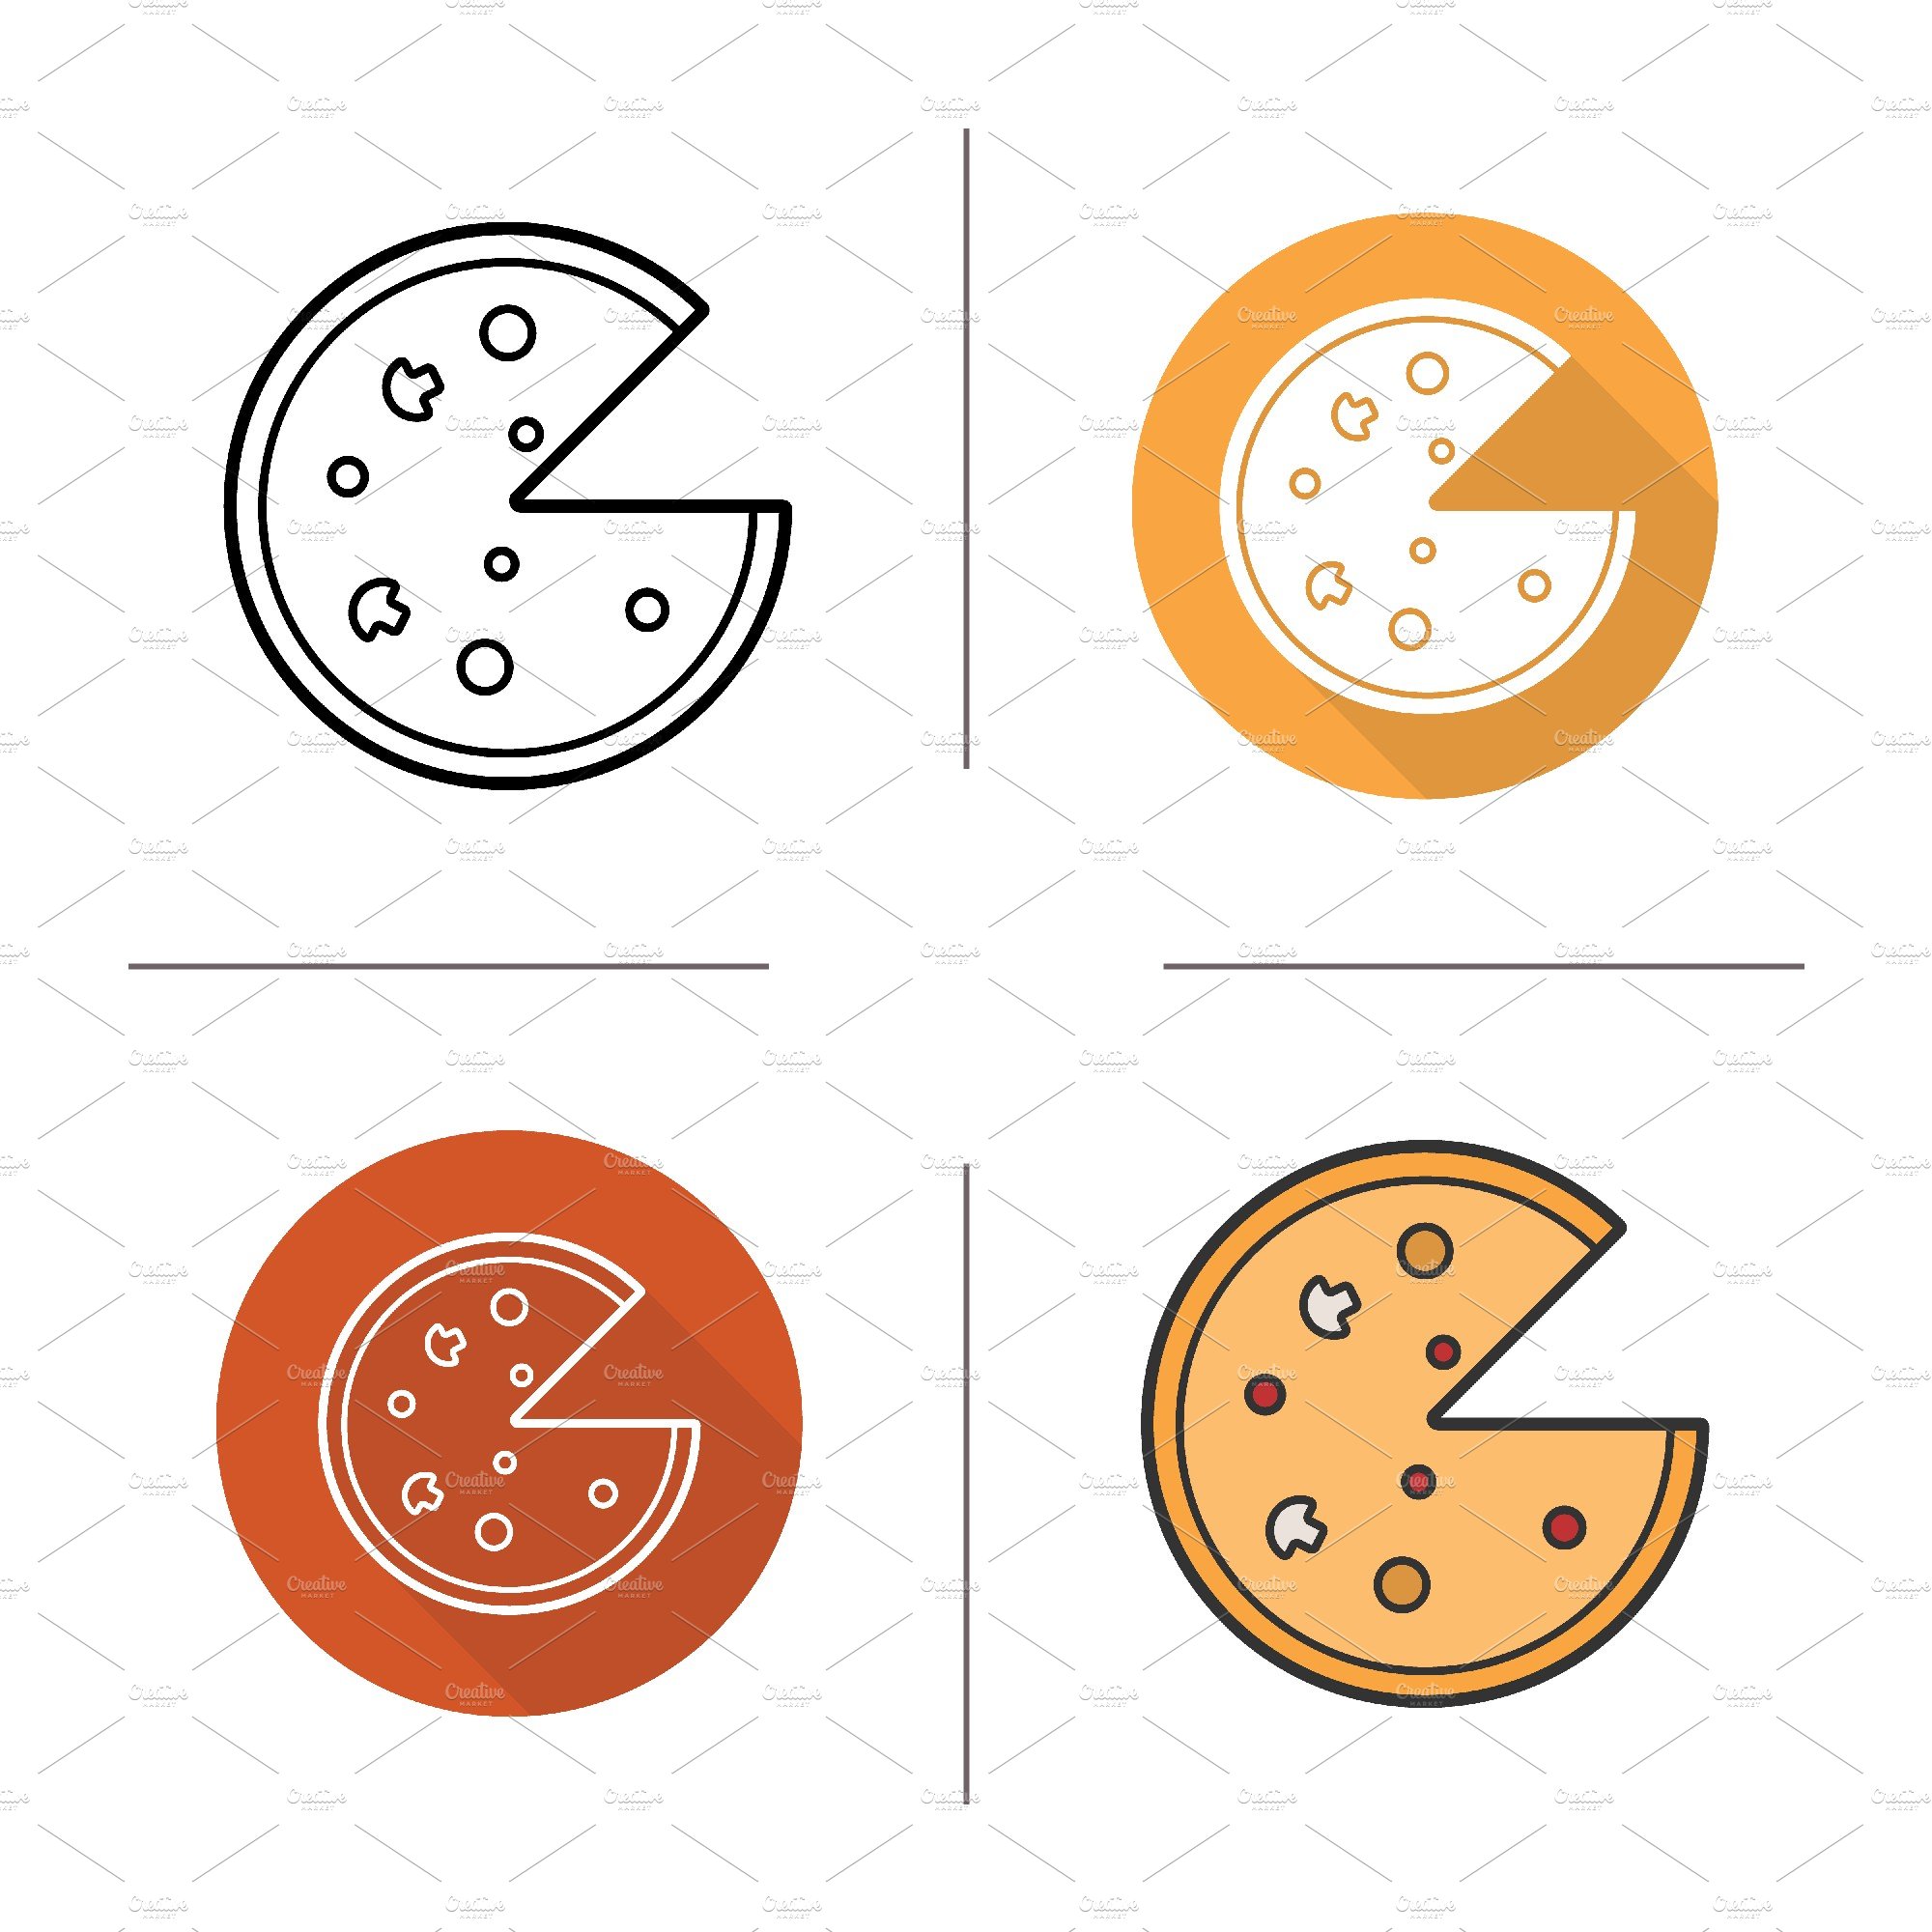 Pizza icons. Vector cover image.